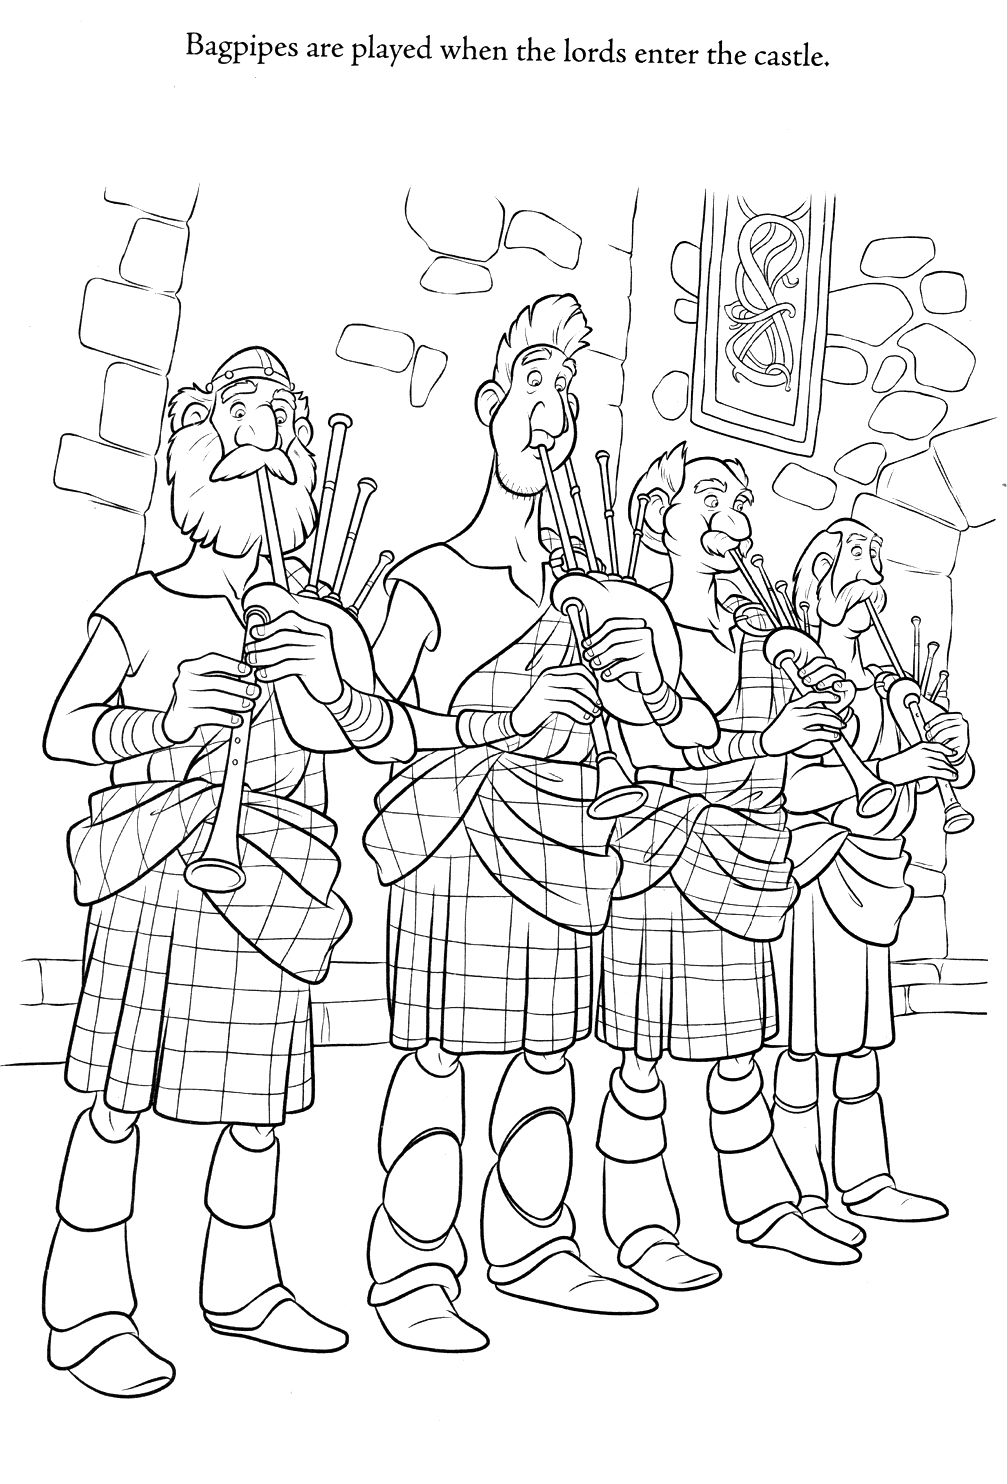 Braves – Bagpipes